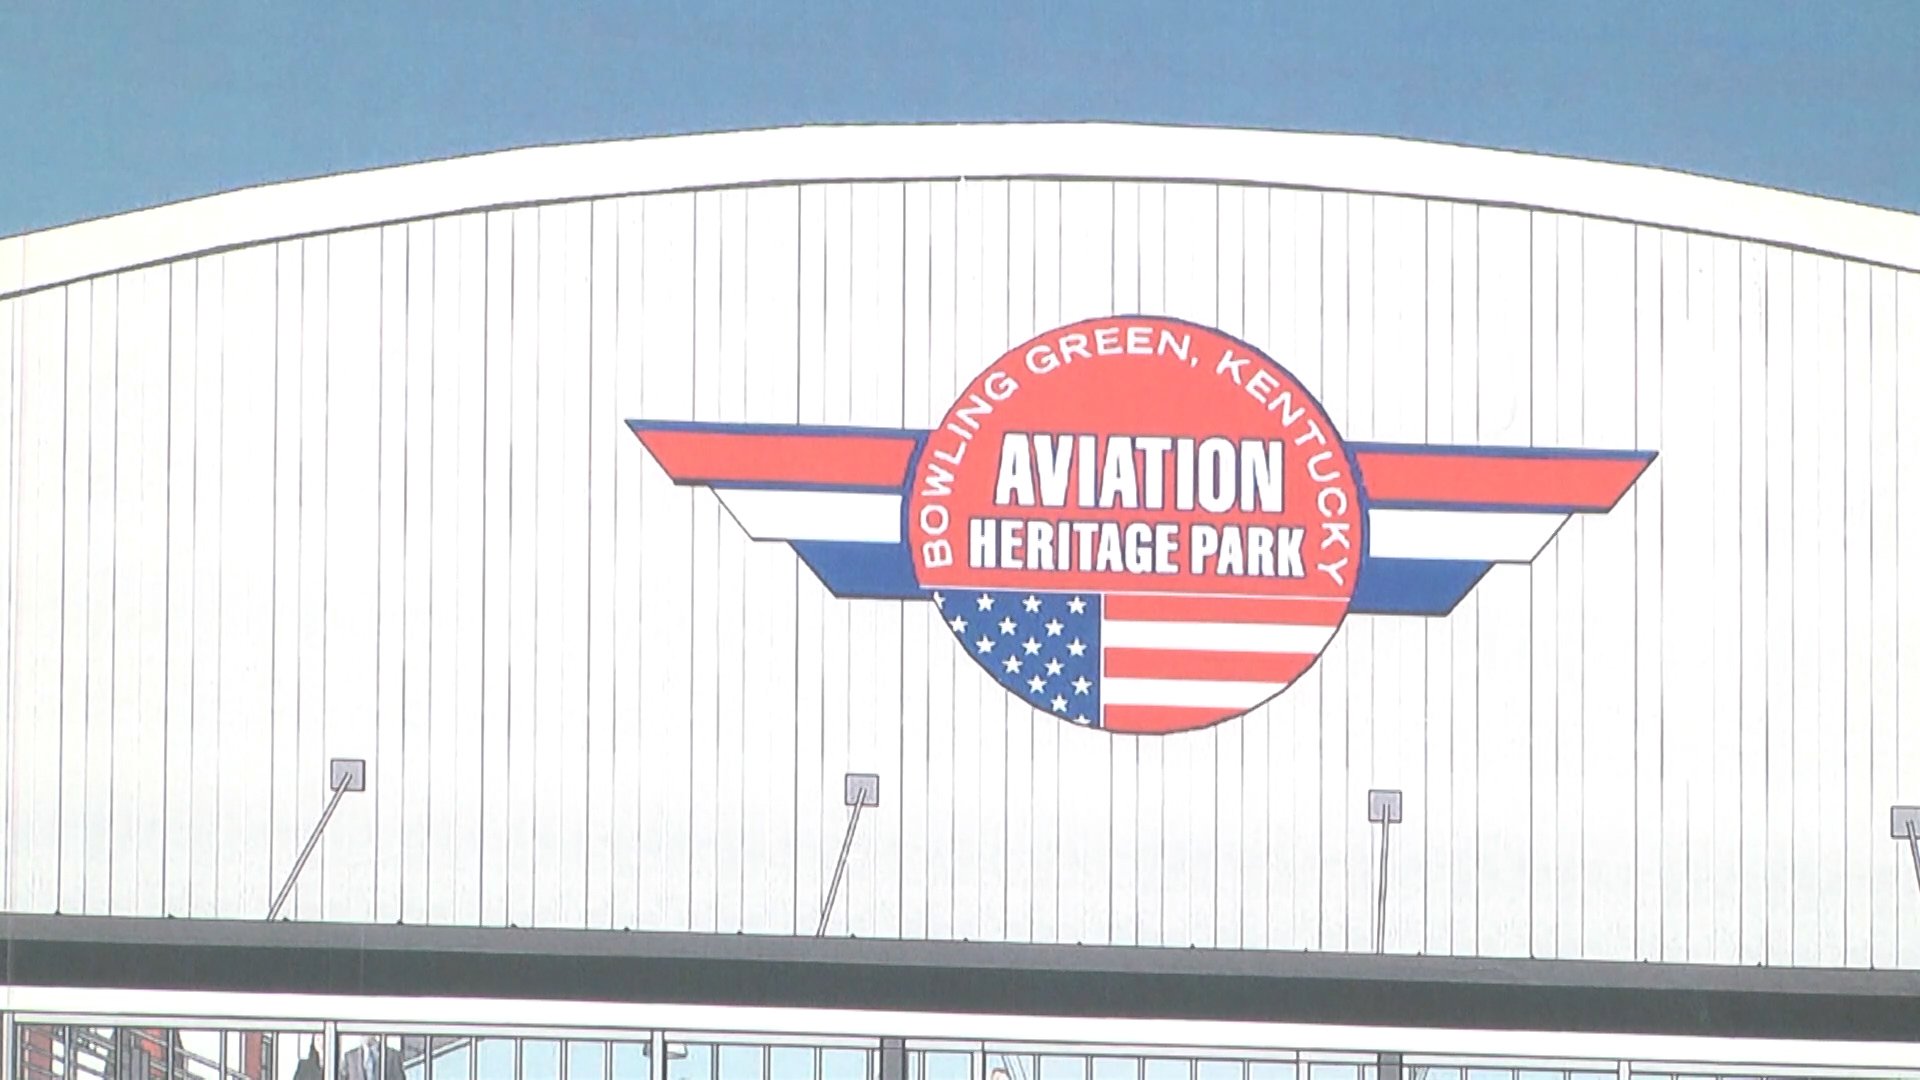 Red River Rats decide to raise money for Aviation Heritage Park Museum